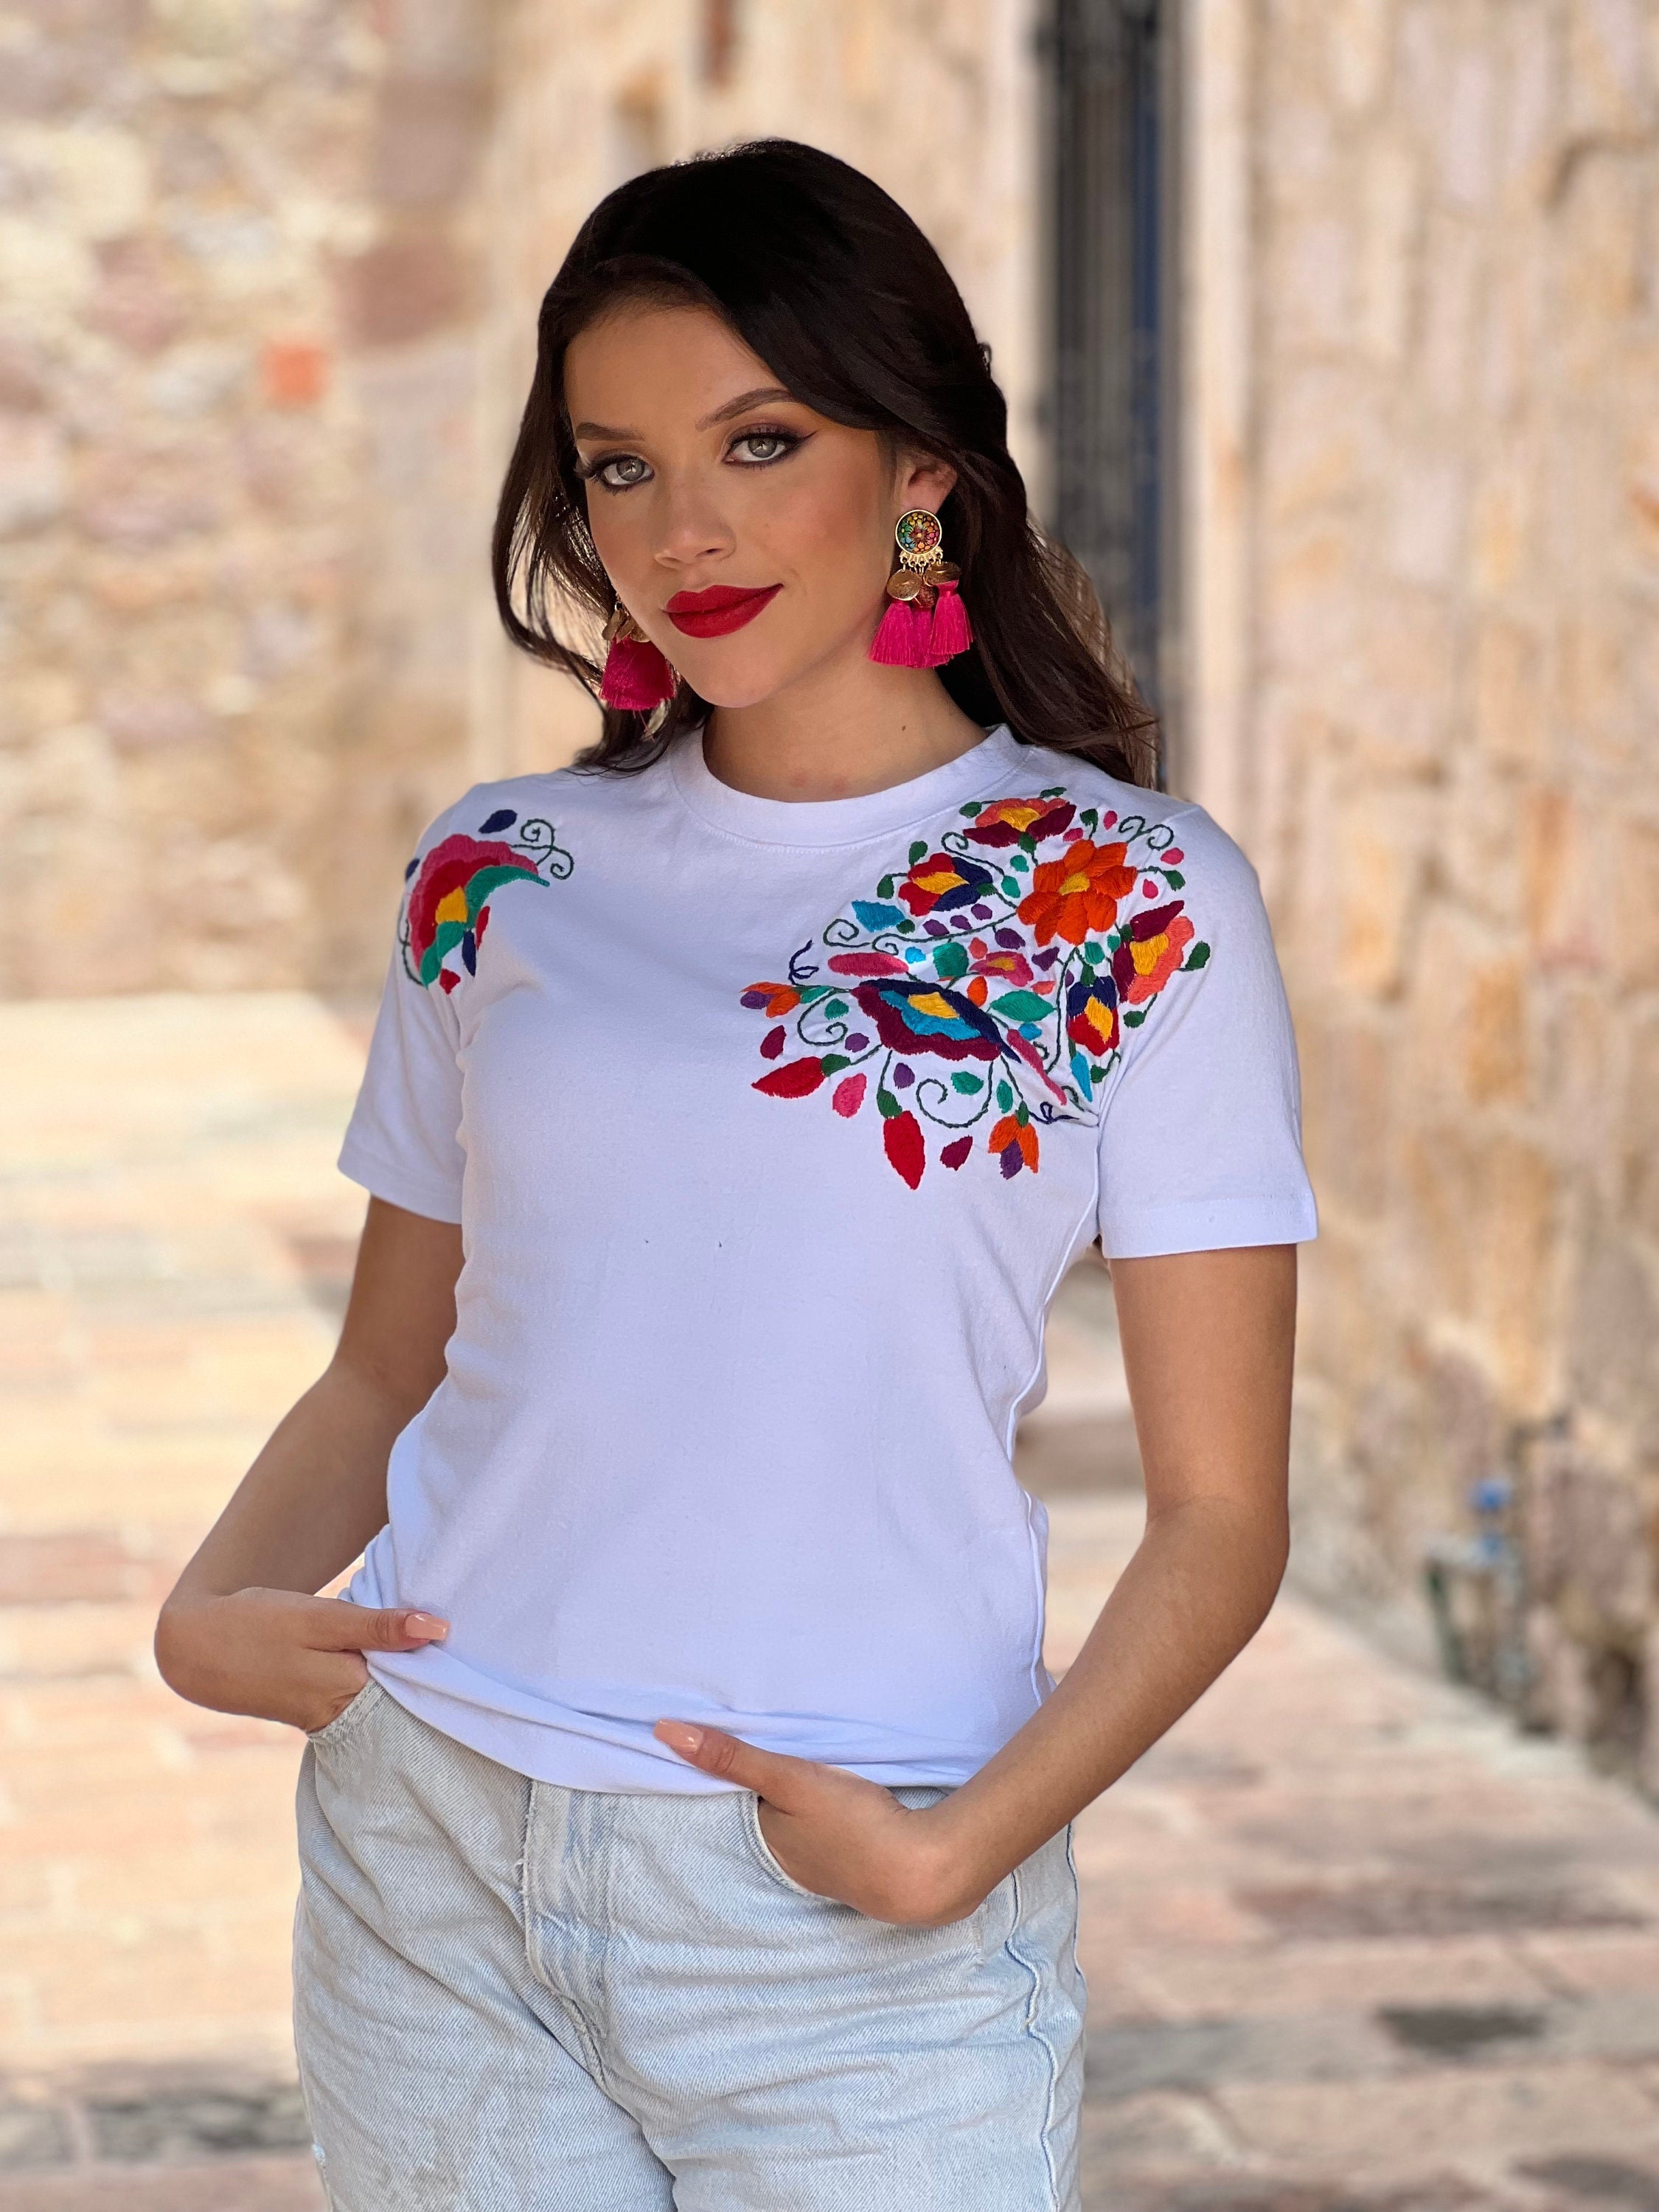 Floral Embroidered T-shirt. Size S 3X. Artisanal Mexican T-shirt. Colorful  Mexican Flowers. Mexican Basic Tee. Hippie-boho Style Top. -  Canada